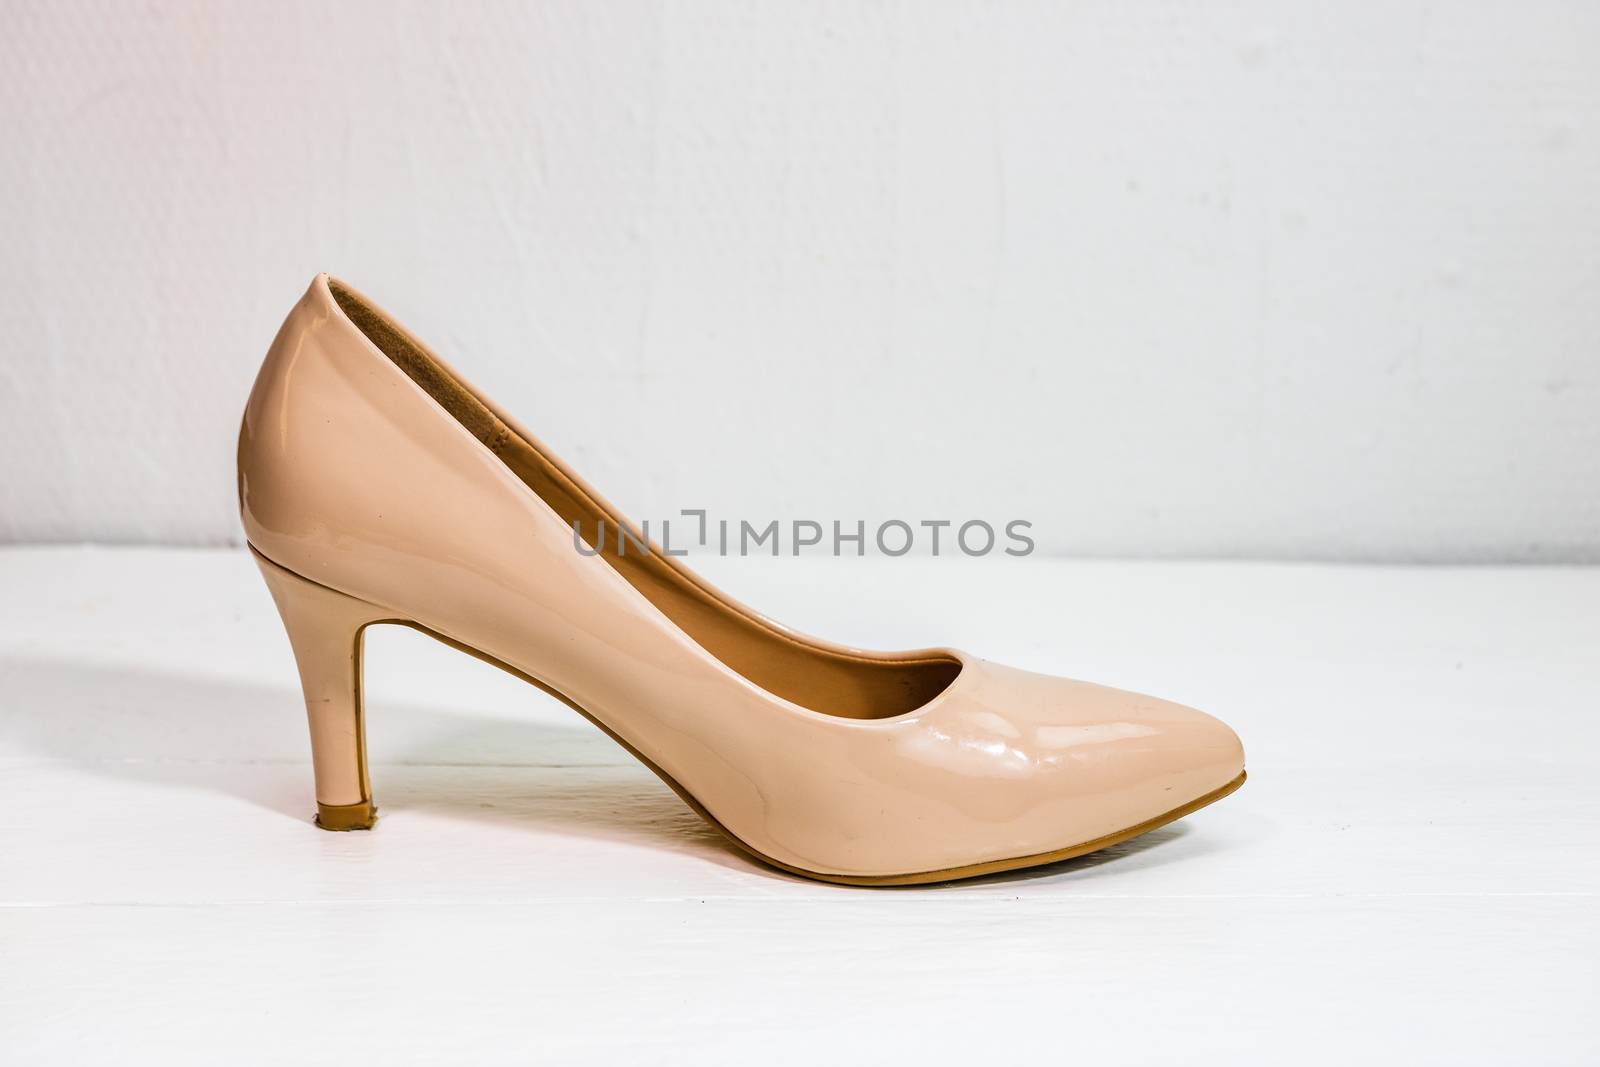 Beige high heels shoes isolated on white background with copy space.